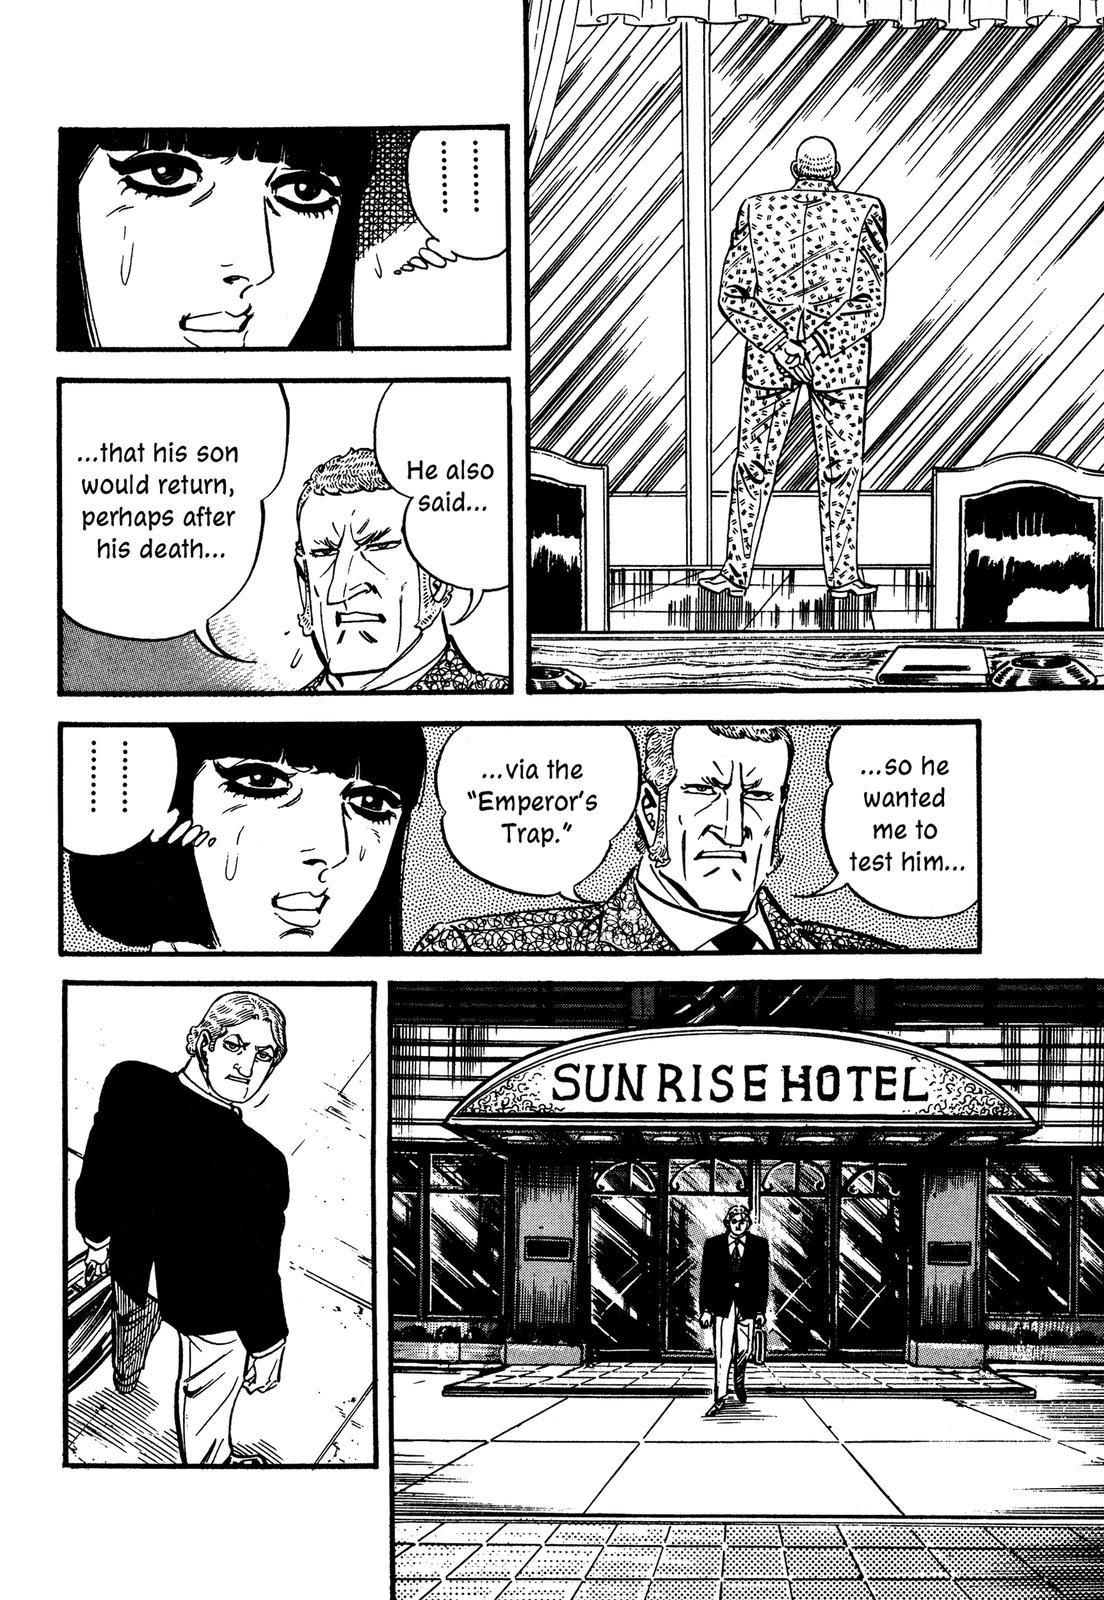 Doll: The Hotel Detective Vol. 3 Ch. 12 An Emperor's Trap